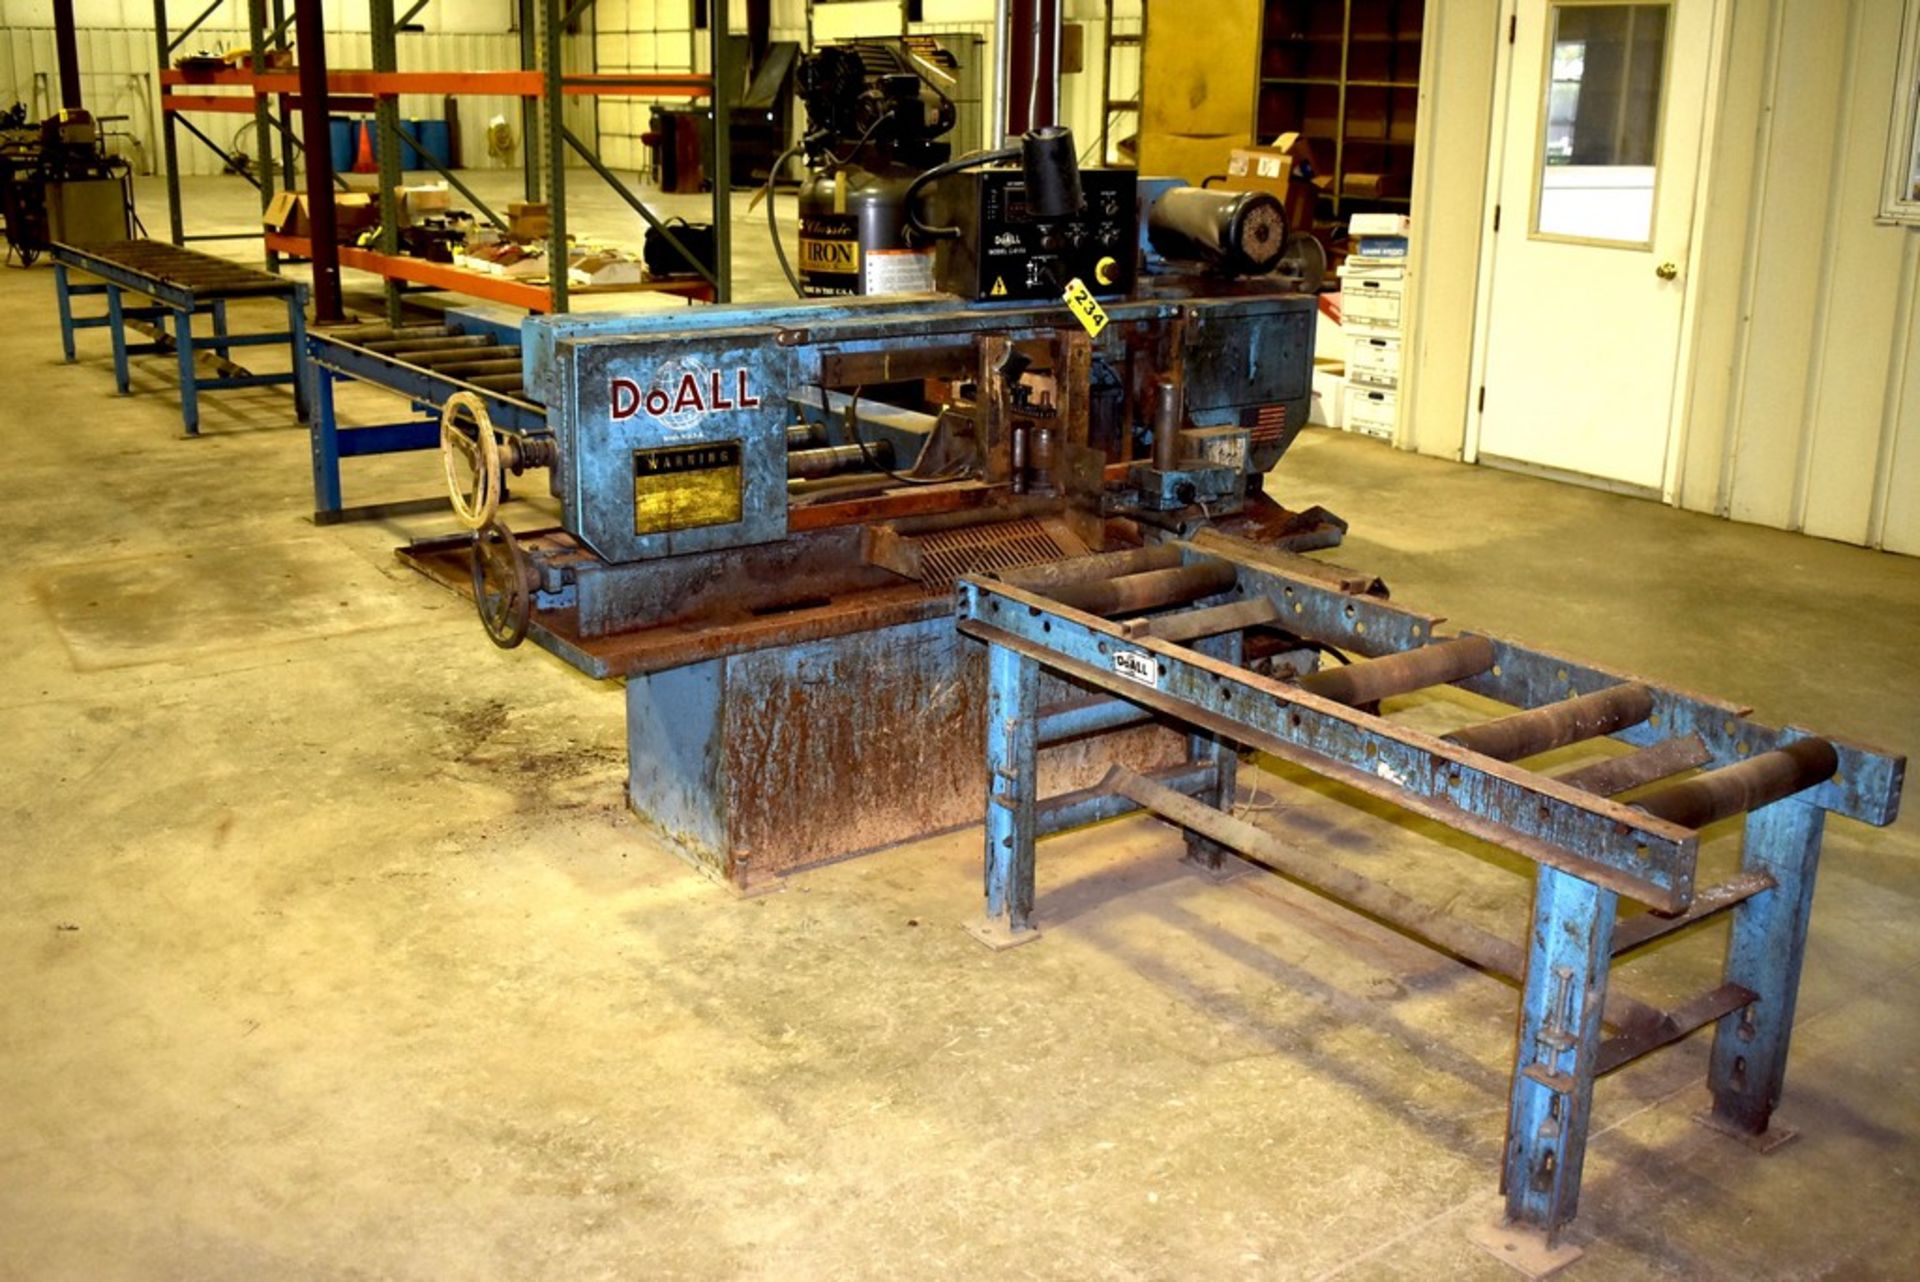 Do All Model C-916-A Horizontal Bandsaw, Serial Number: 528-97299 ( New 1997) 9" x 16" Capacity -